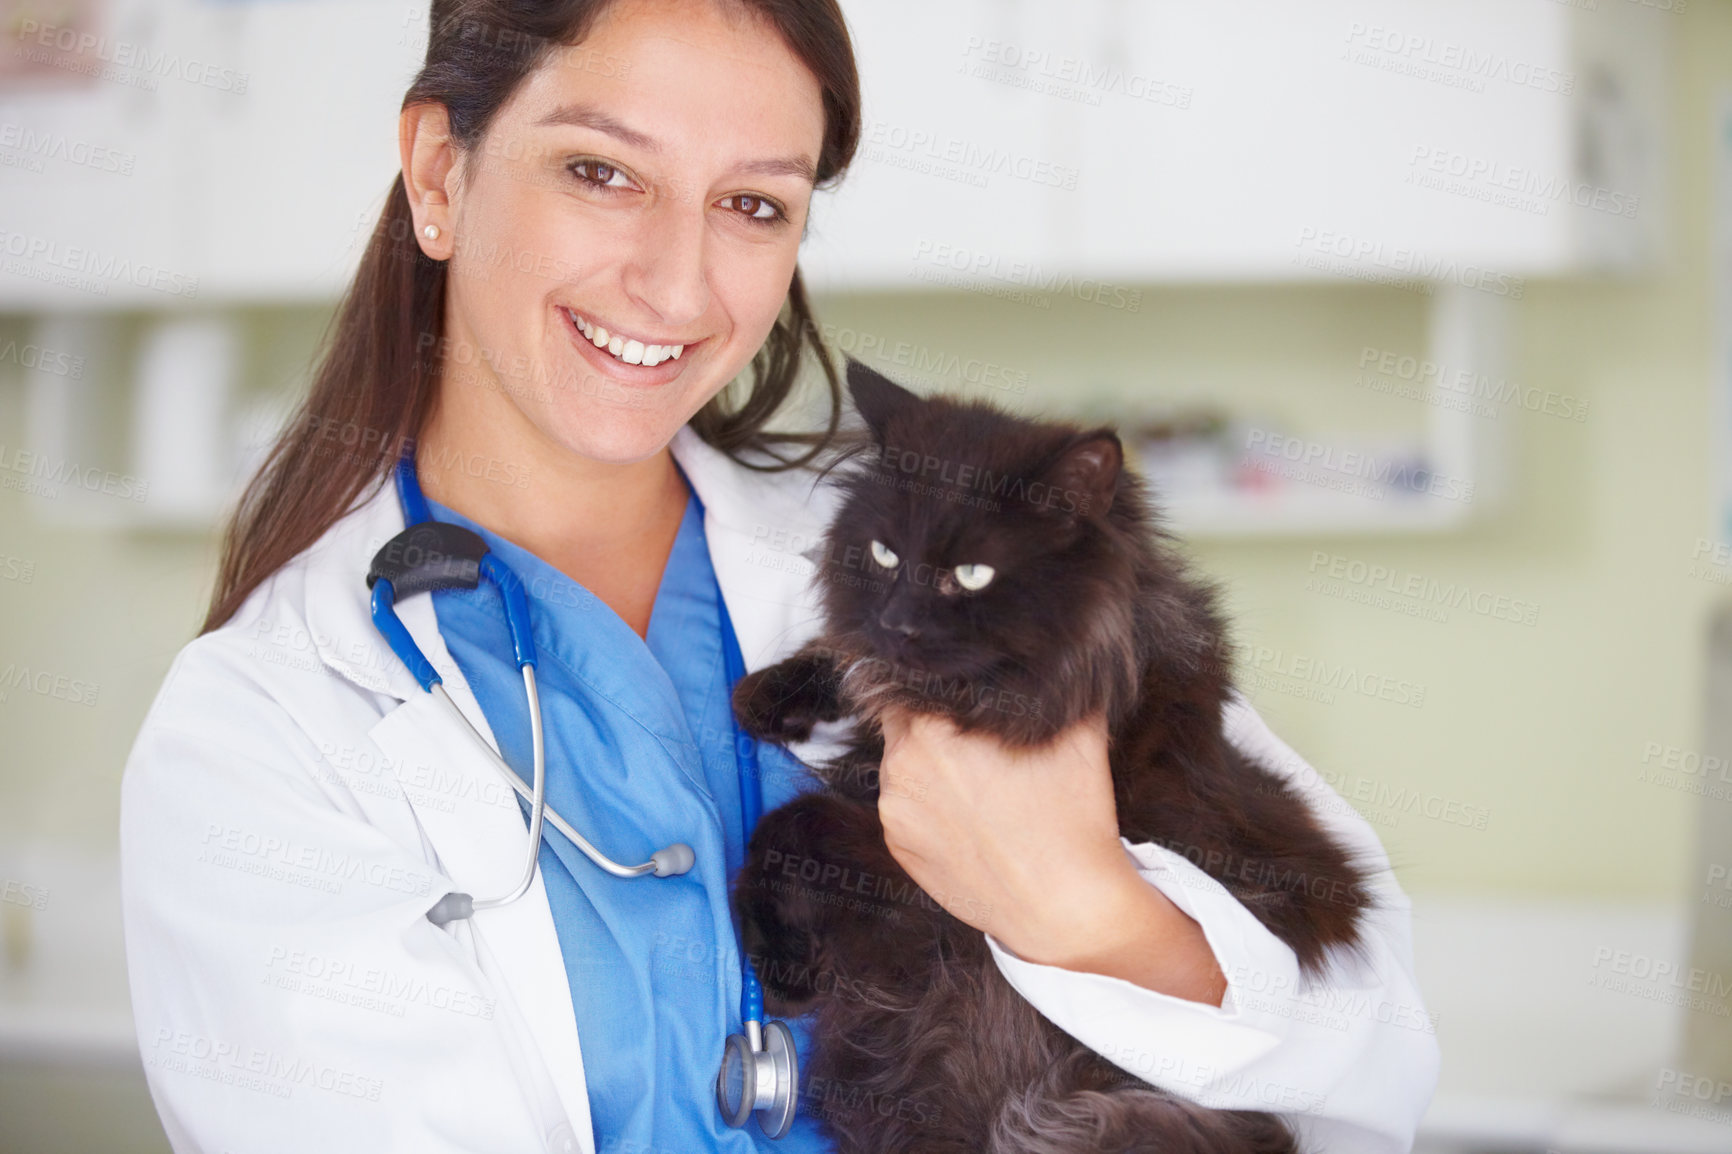 Buy stock photo Vet clinic portrait, cat and happy woman for medical help, wellness healing services or healthcare support. Happiness, veterinary job experience or hospital veterinarian smile for feline checkup